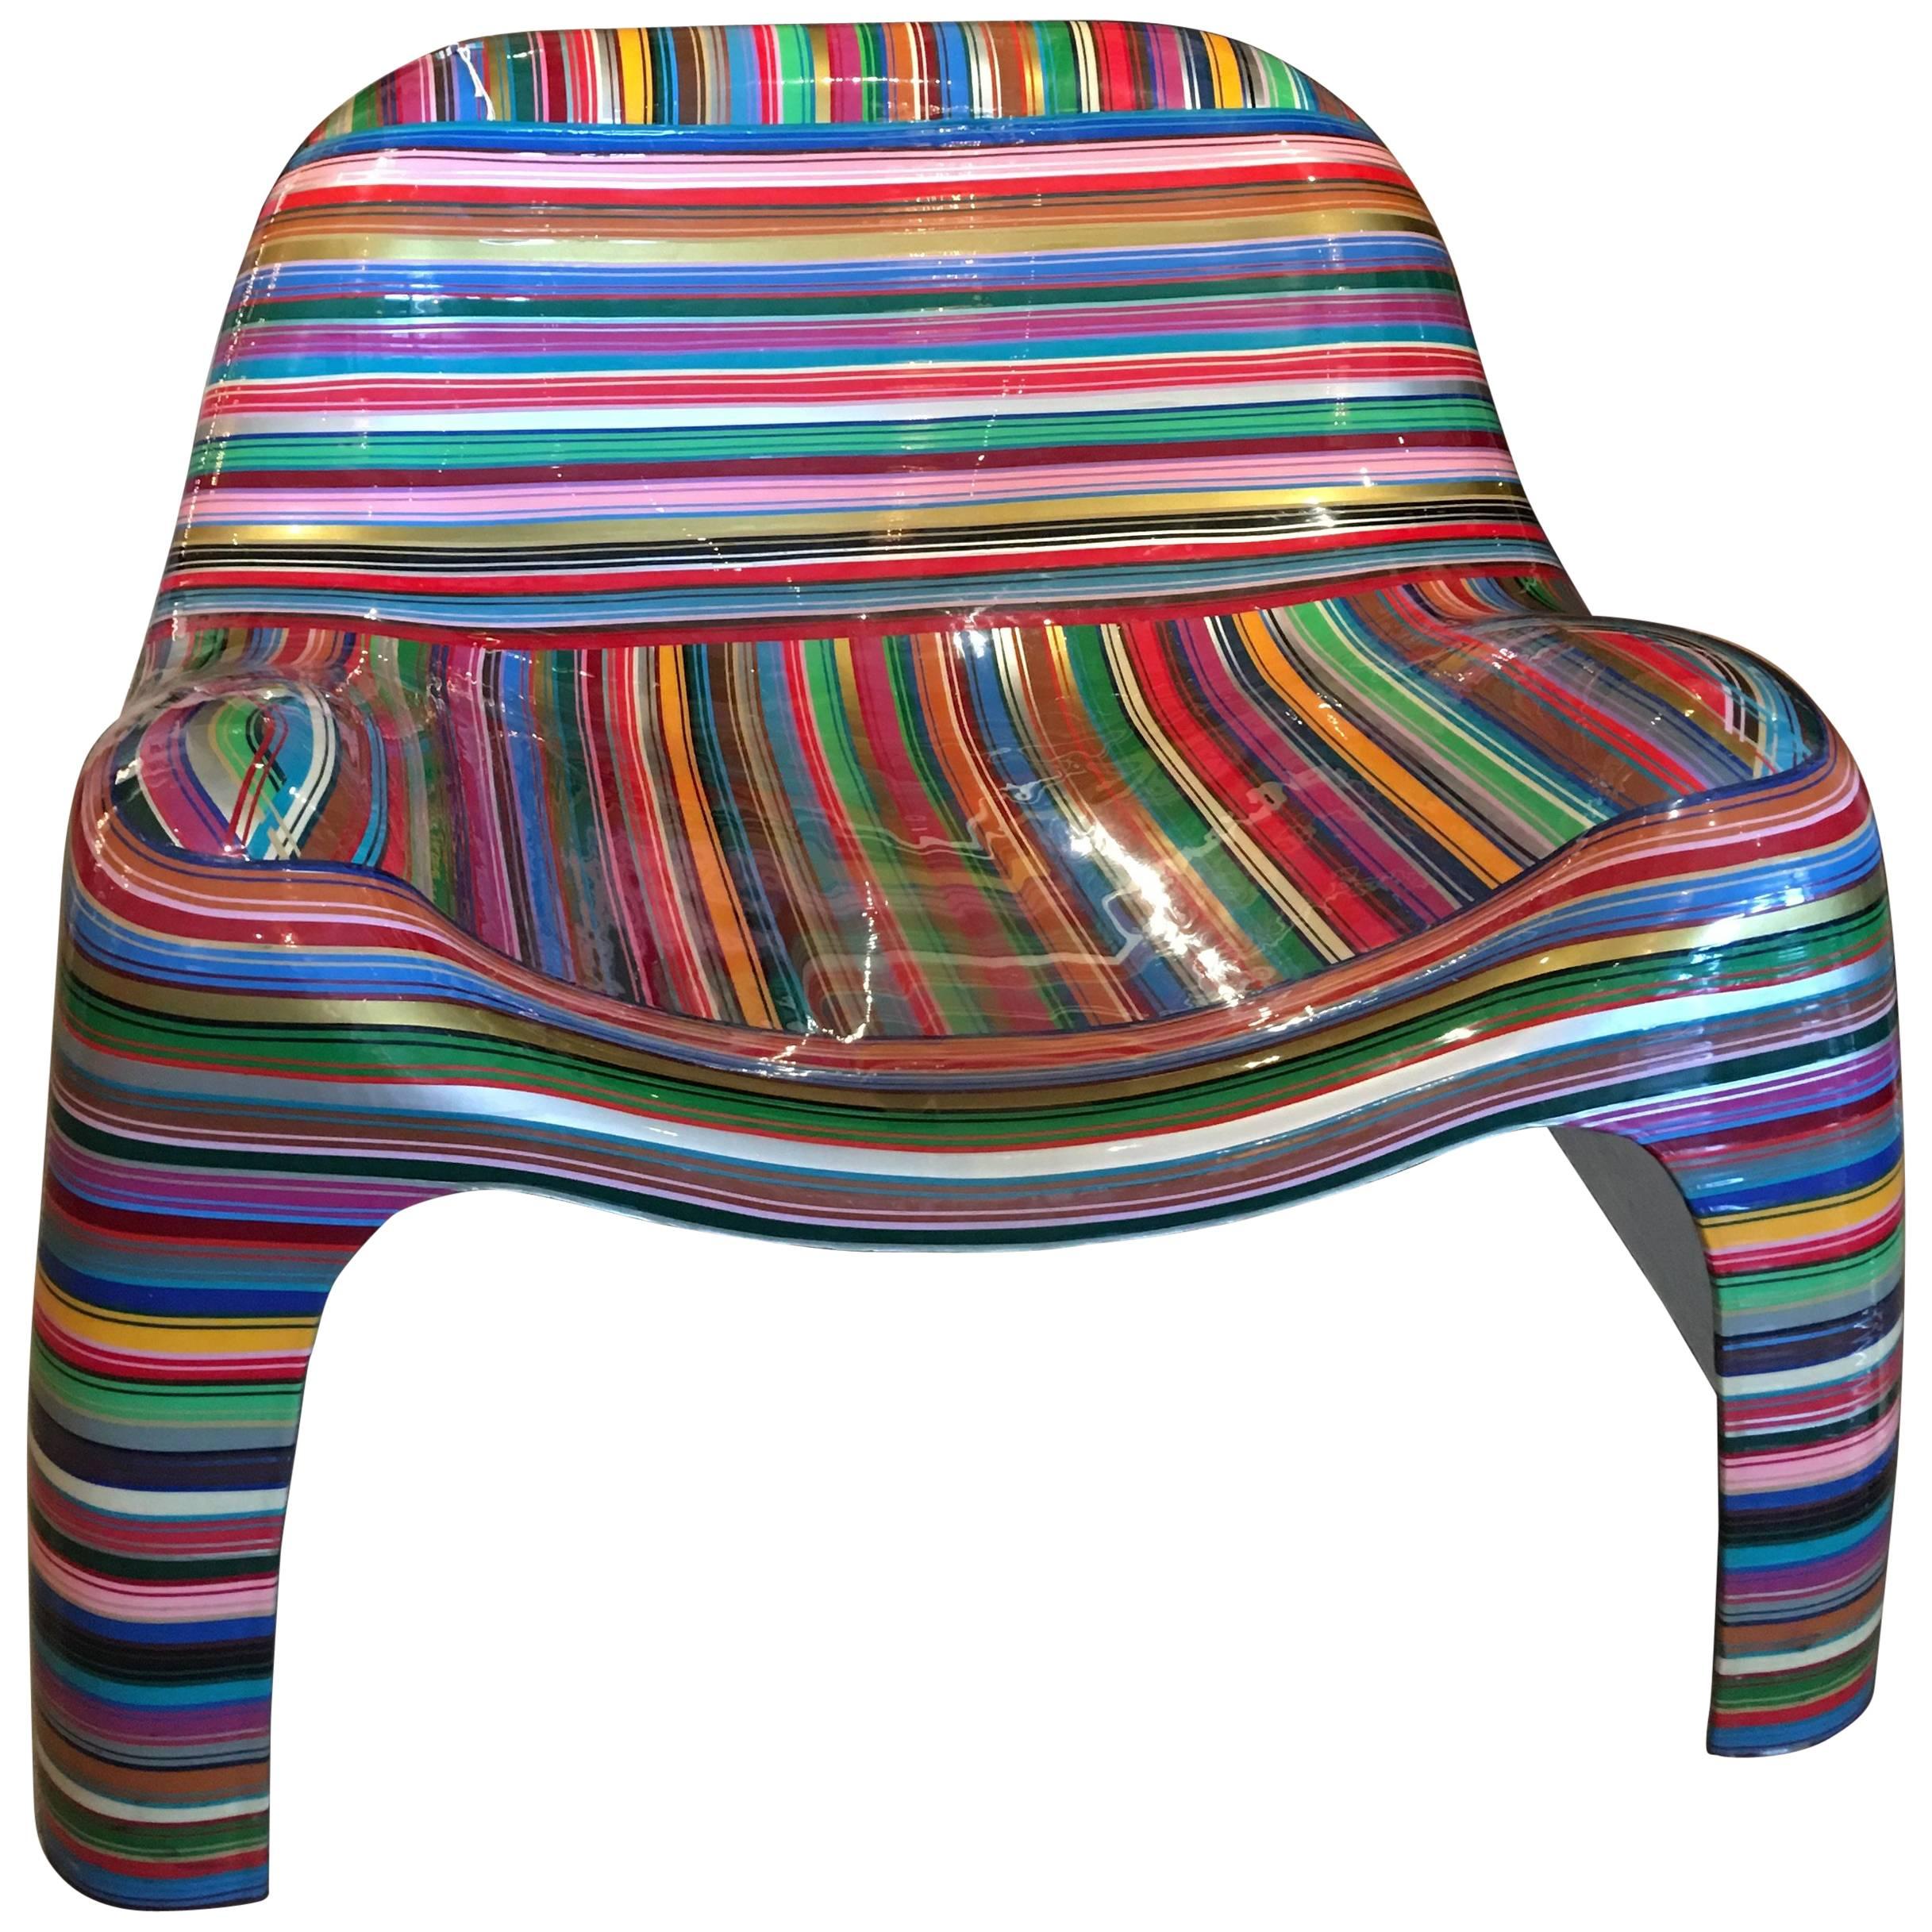 Mauro Oliveira "Hard Candy" Painted Chair For Sale